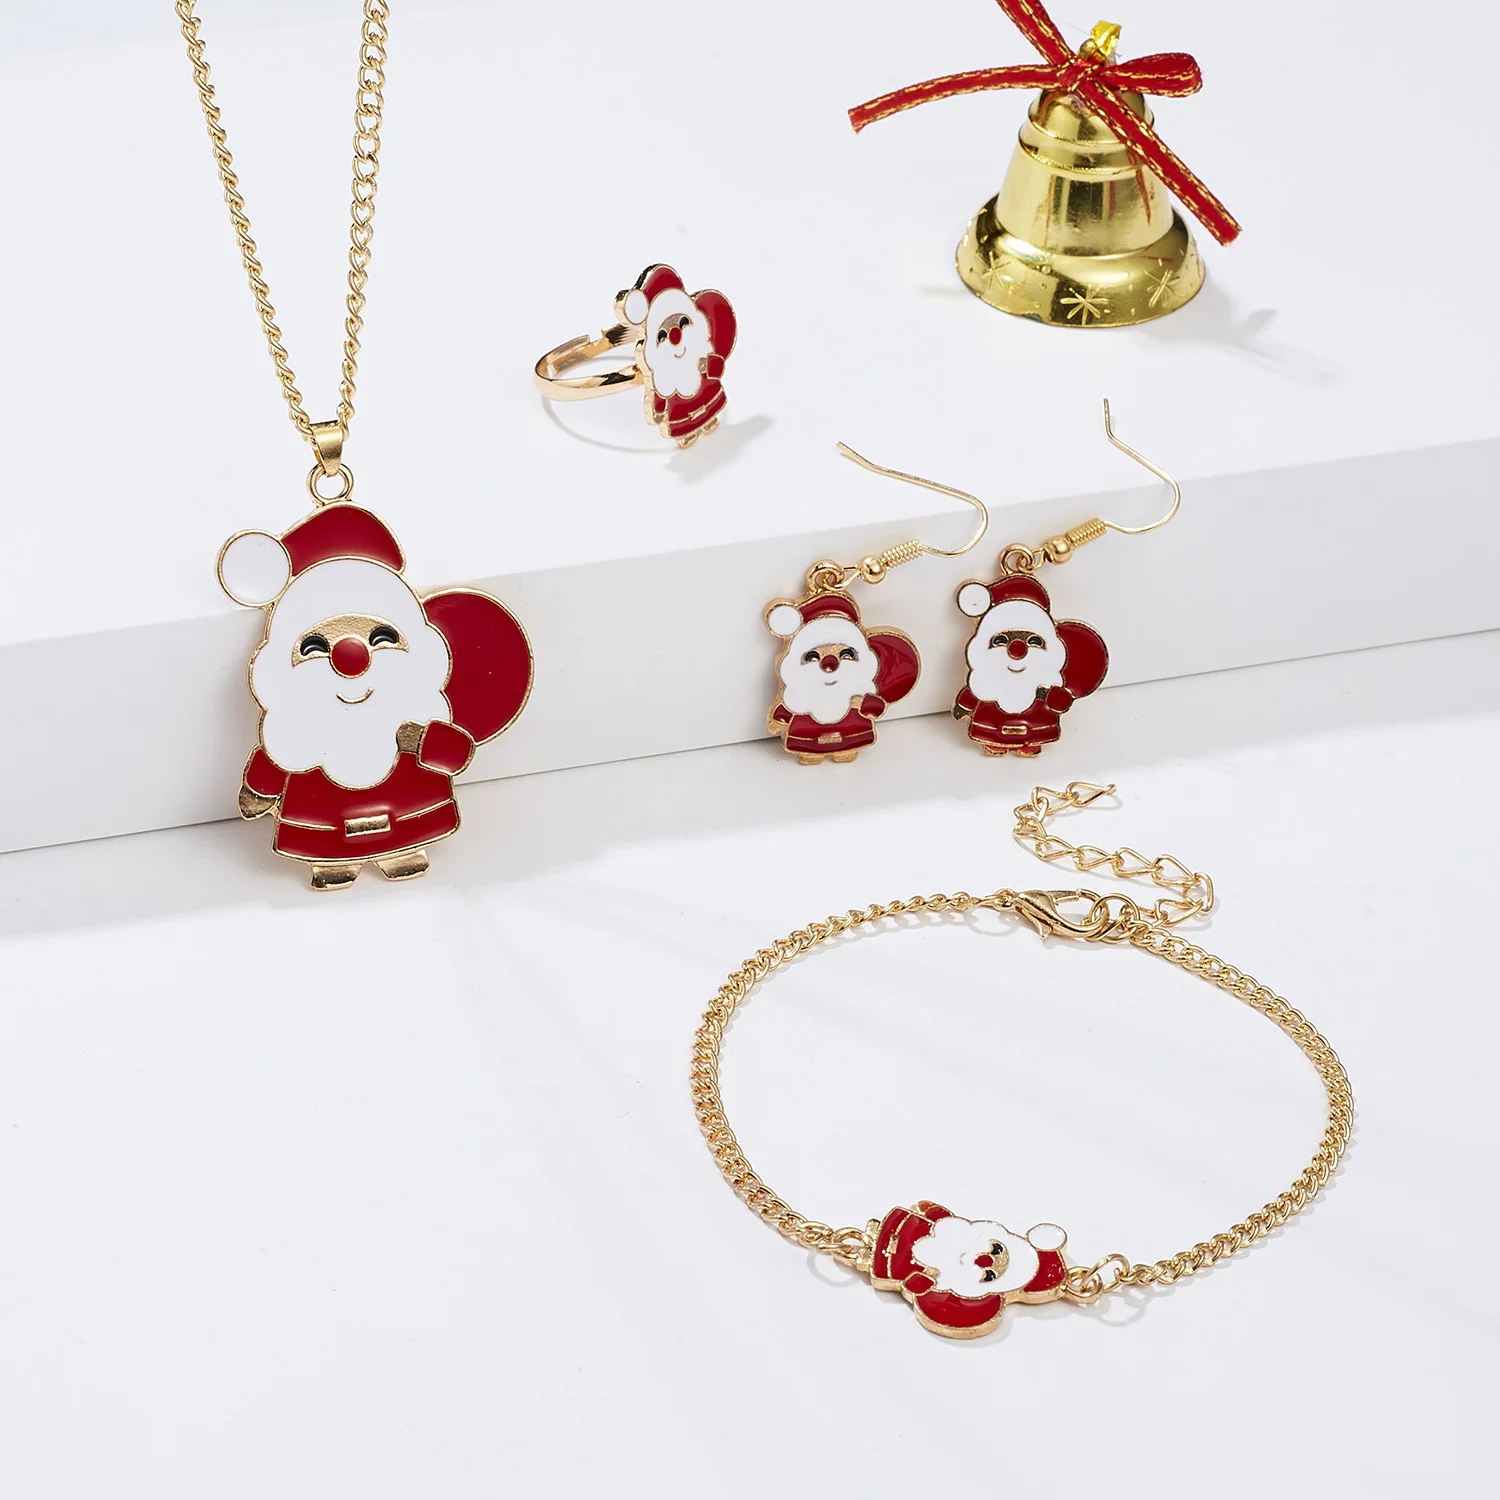 

LWC10121 4pcs/set Bells Snowman Painting Oil Necklace Earrings Bracelet Ring Alloy Christmas Jewelry Set, Picture shows